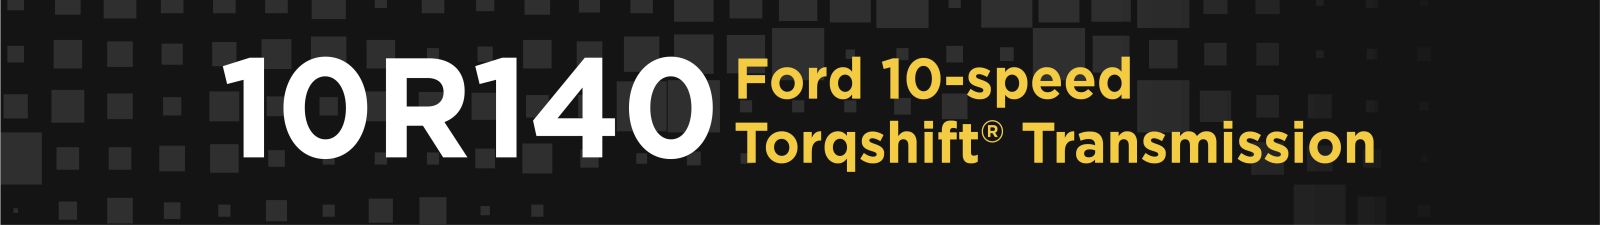 A banner displaying the words 10R140 Ford 10-speed Torqshift transmission